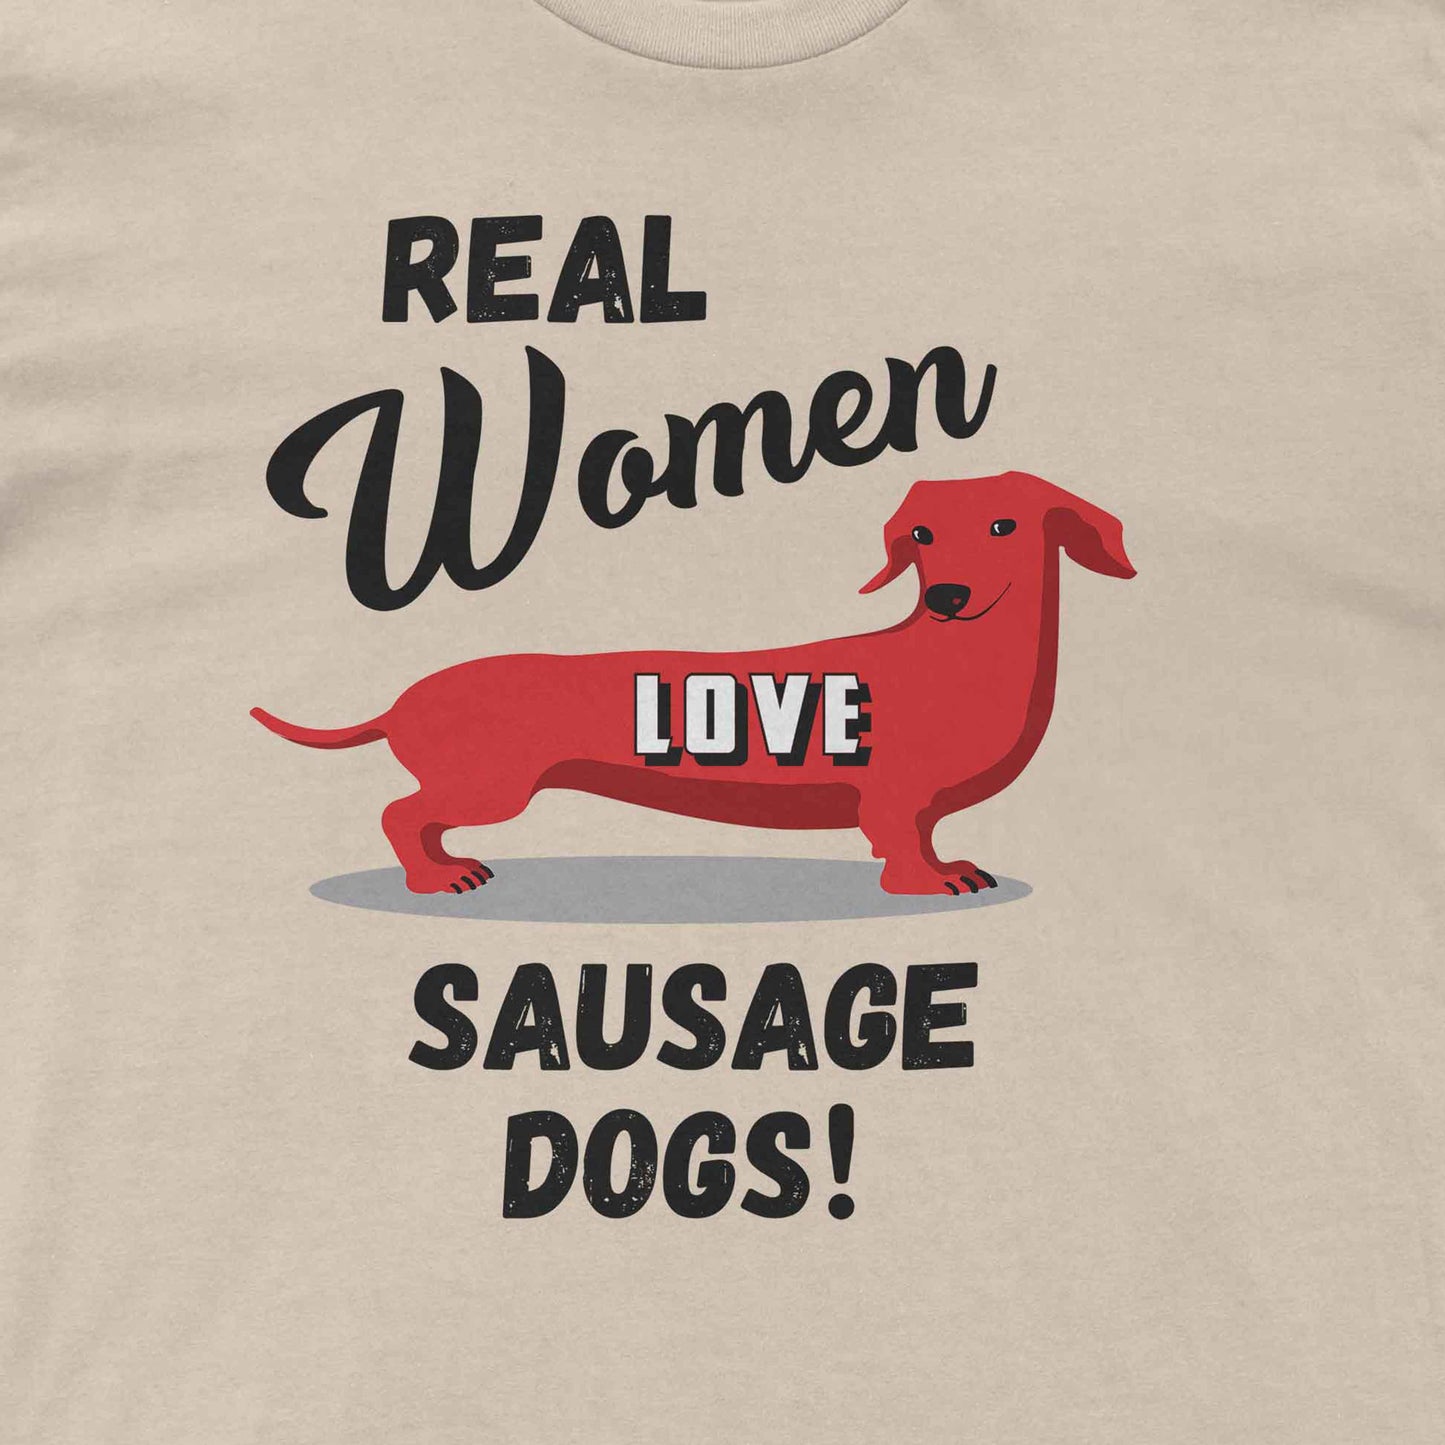 Real Women Love Sausage Dogs T-shirt